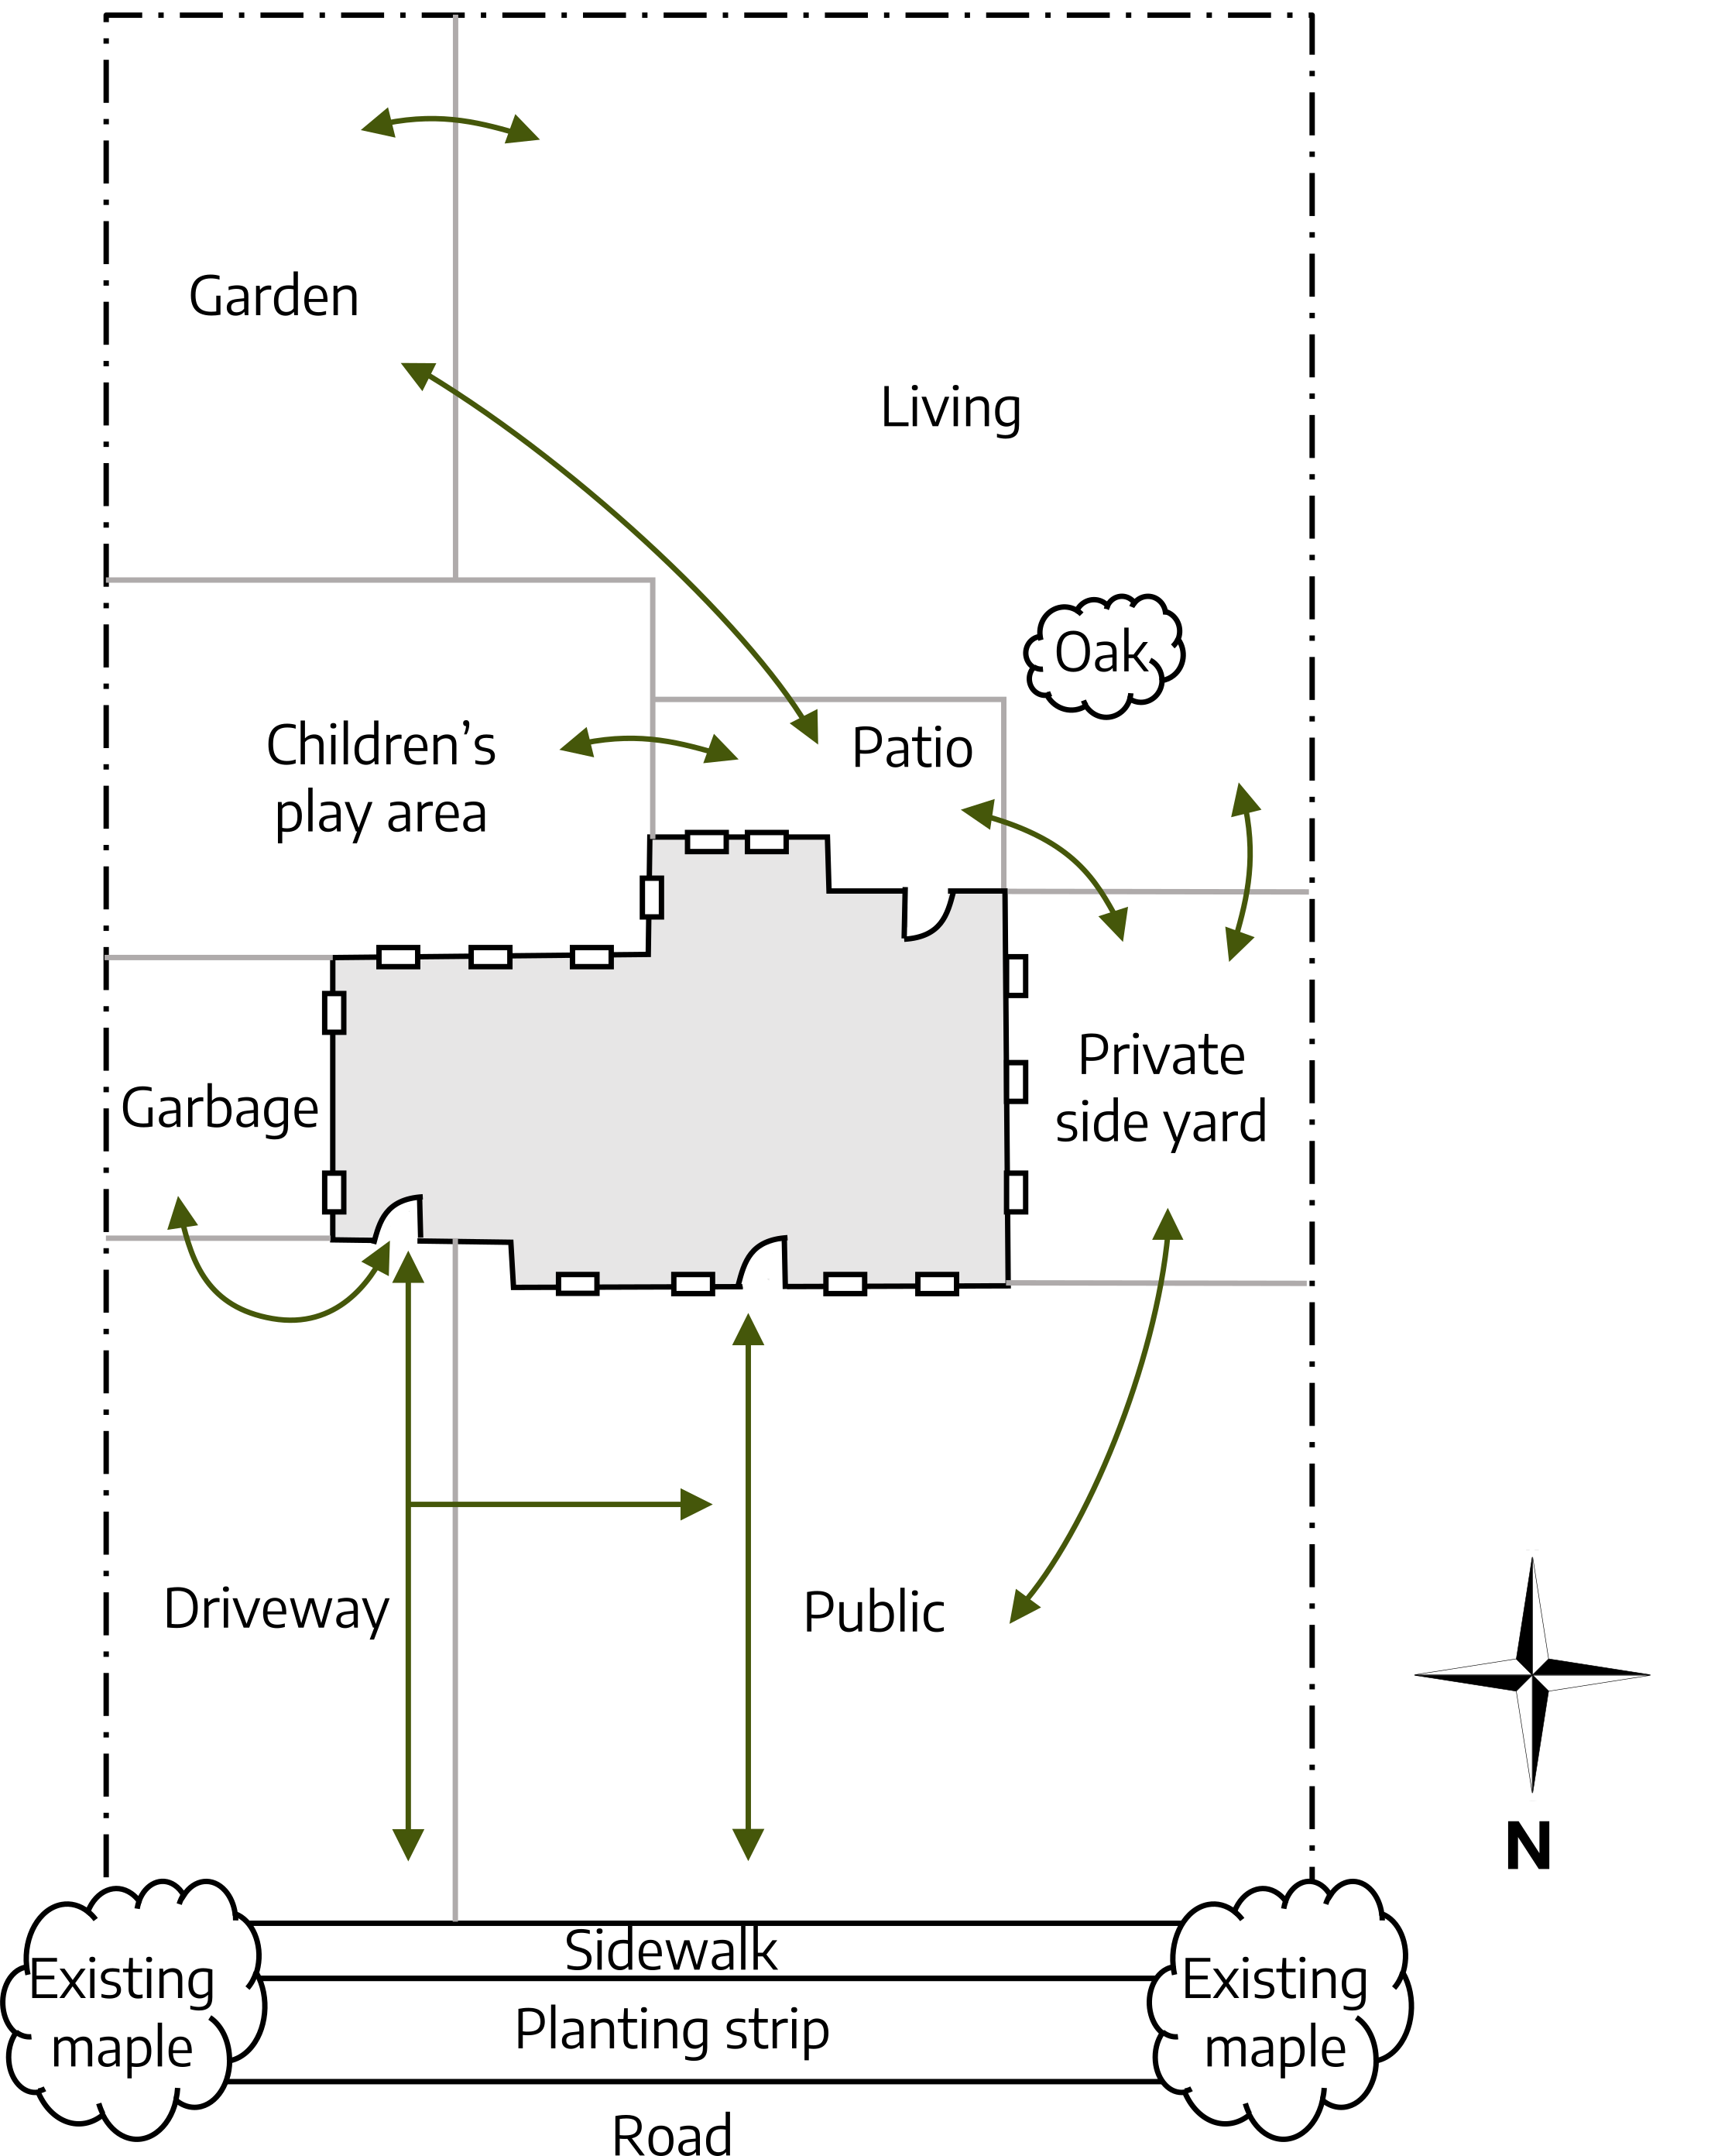 A diagram. A large dashed rectangle with a house drawn in the center shaded in gray with windows and doors shown around the edge. Several existing sections around the house marked living, upper right, patio, on the upper side of the house, children's play area is on the left side, garden in the top left corner, garbage on the left side of the house, private side yard on the right side of the house, the lower right section is public, and the lower left side is driveway. Throughout the diagram are several pathways showing traffic flow. At the bottom of the diagram is sidewalk, planting strip, road, and existing maples on both bottom corners.